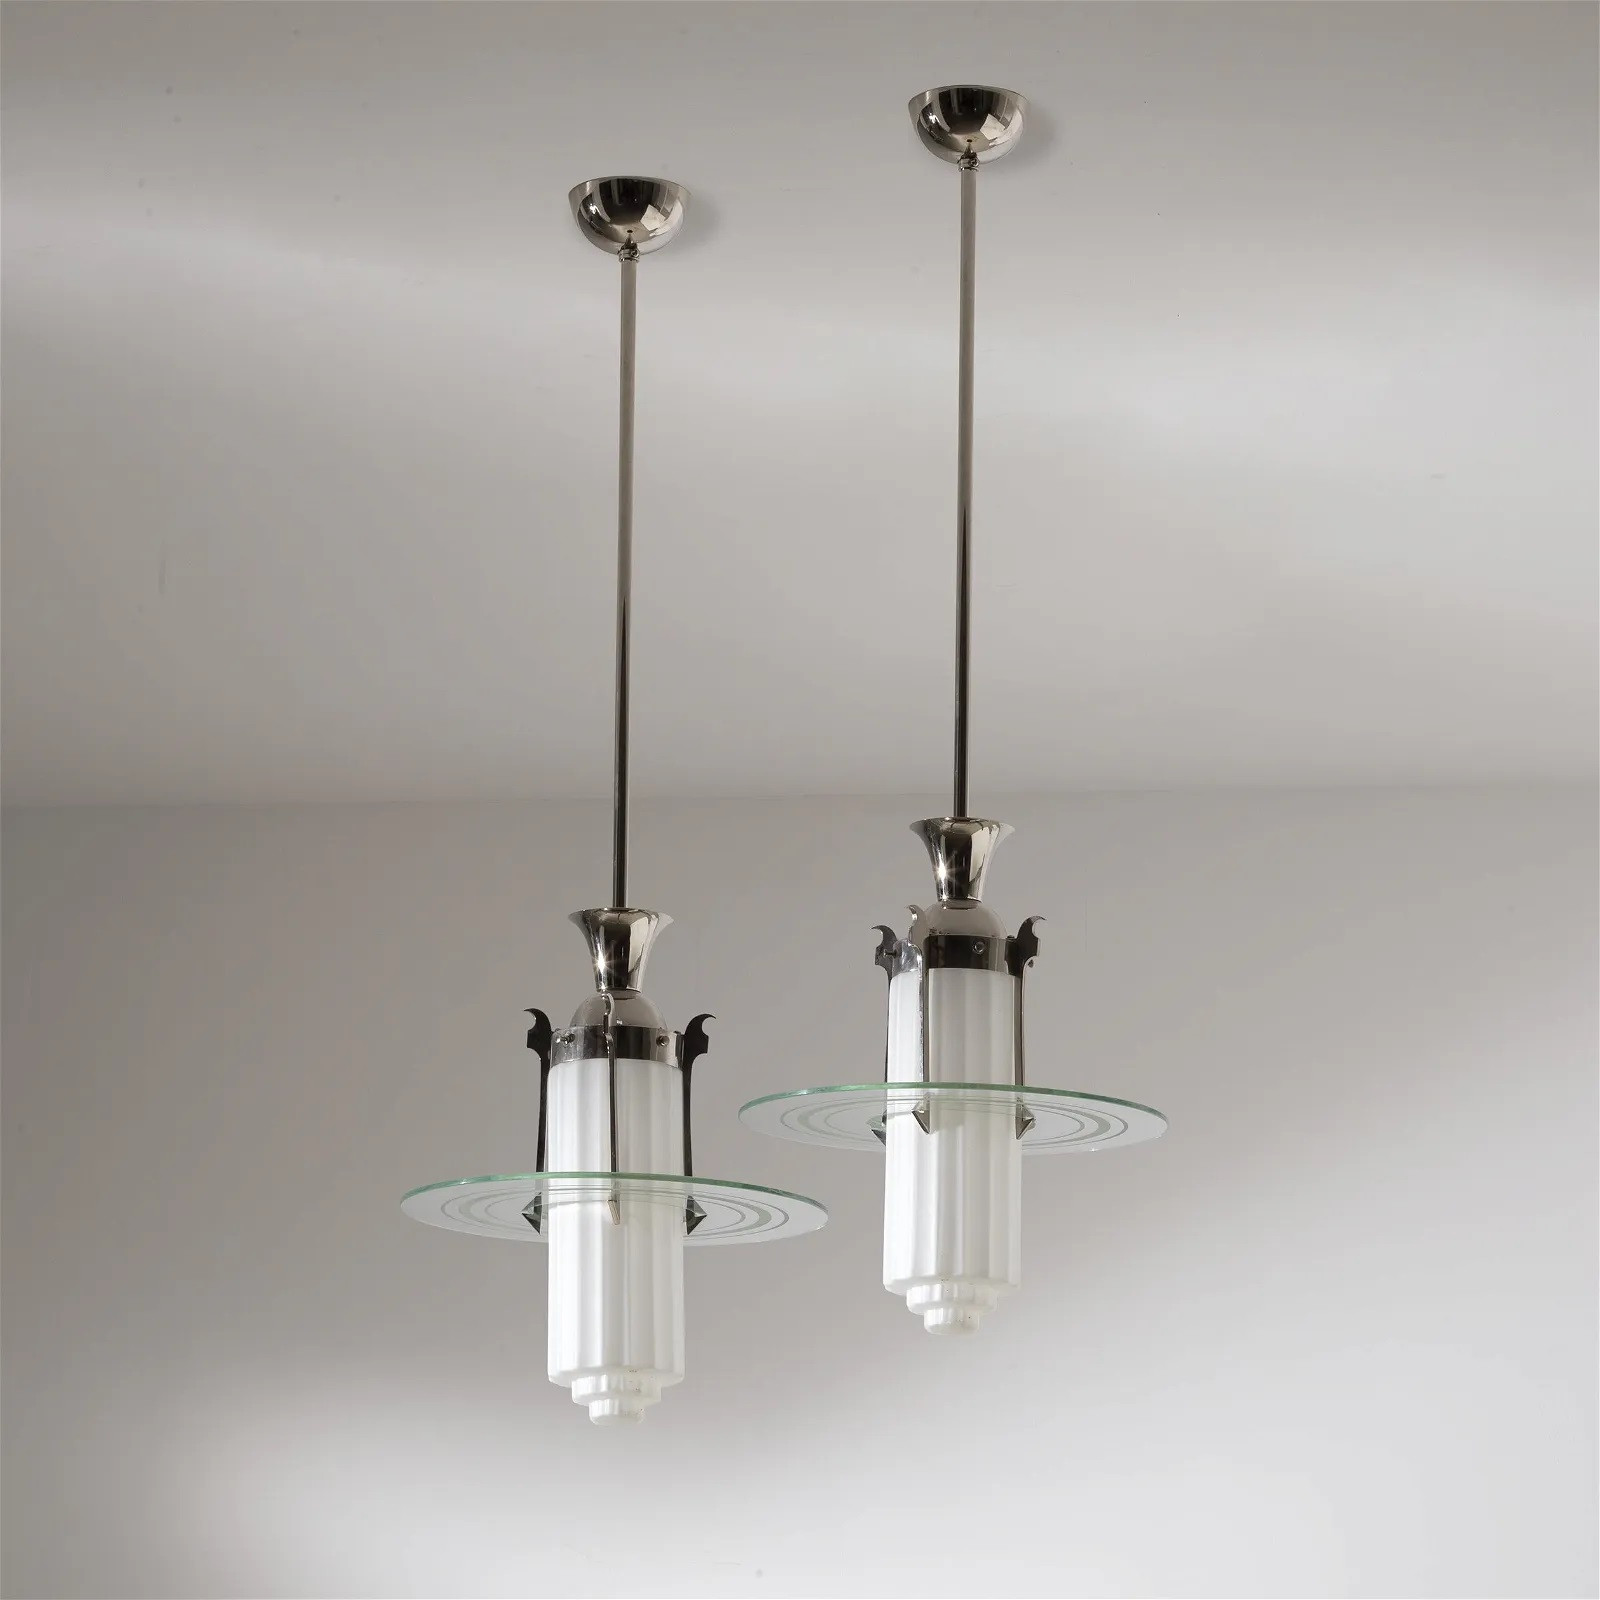 1930s Pair of Ceiling Lights attr. to Paolo Buffa